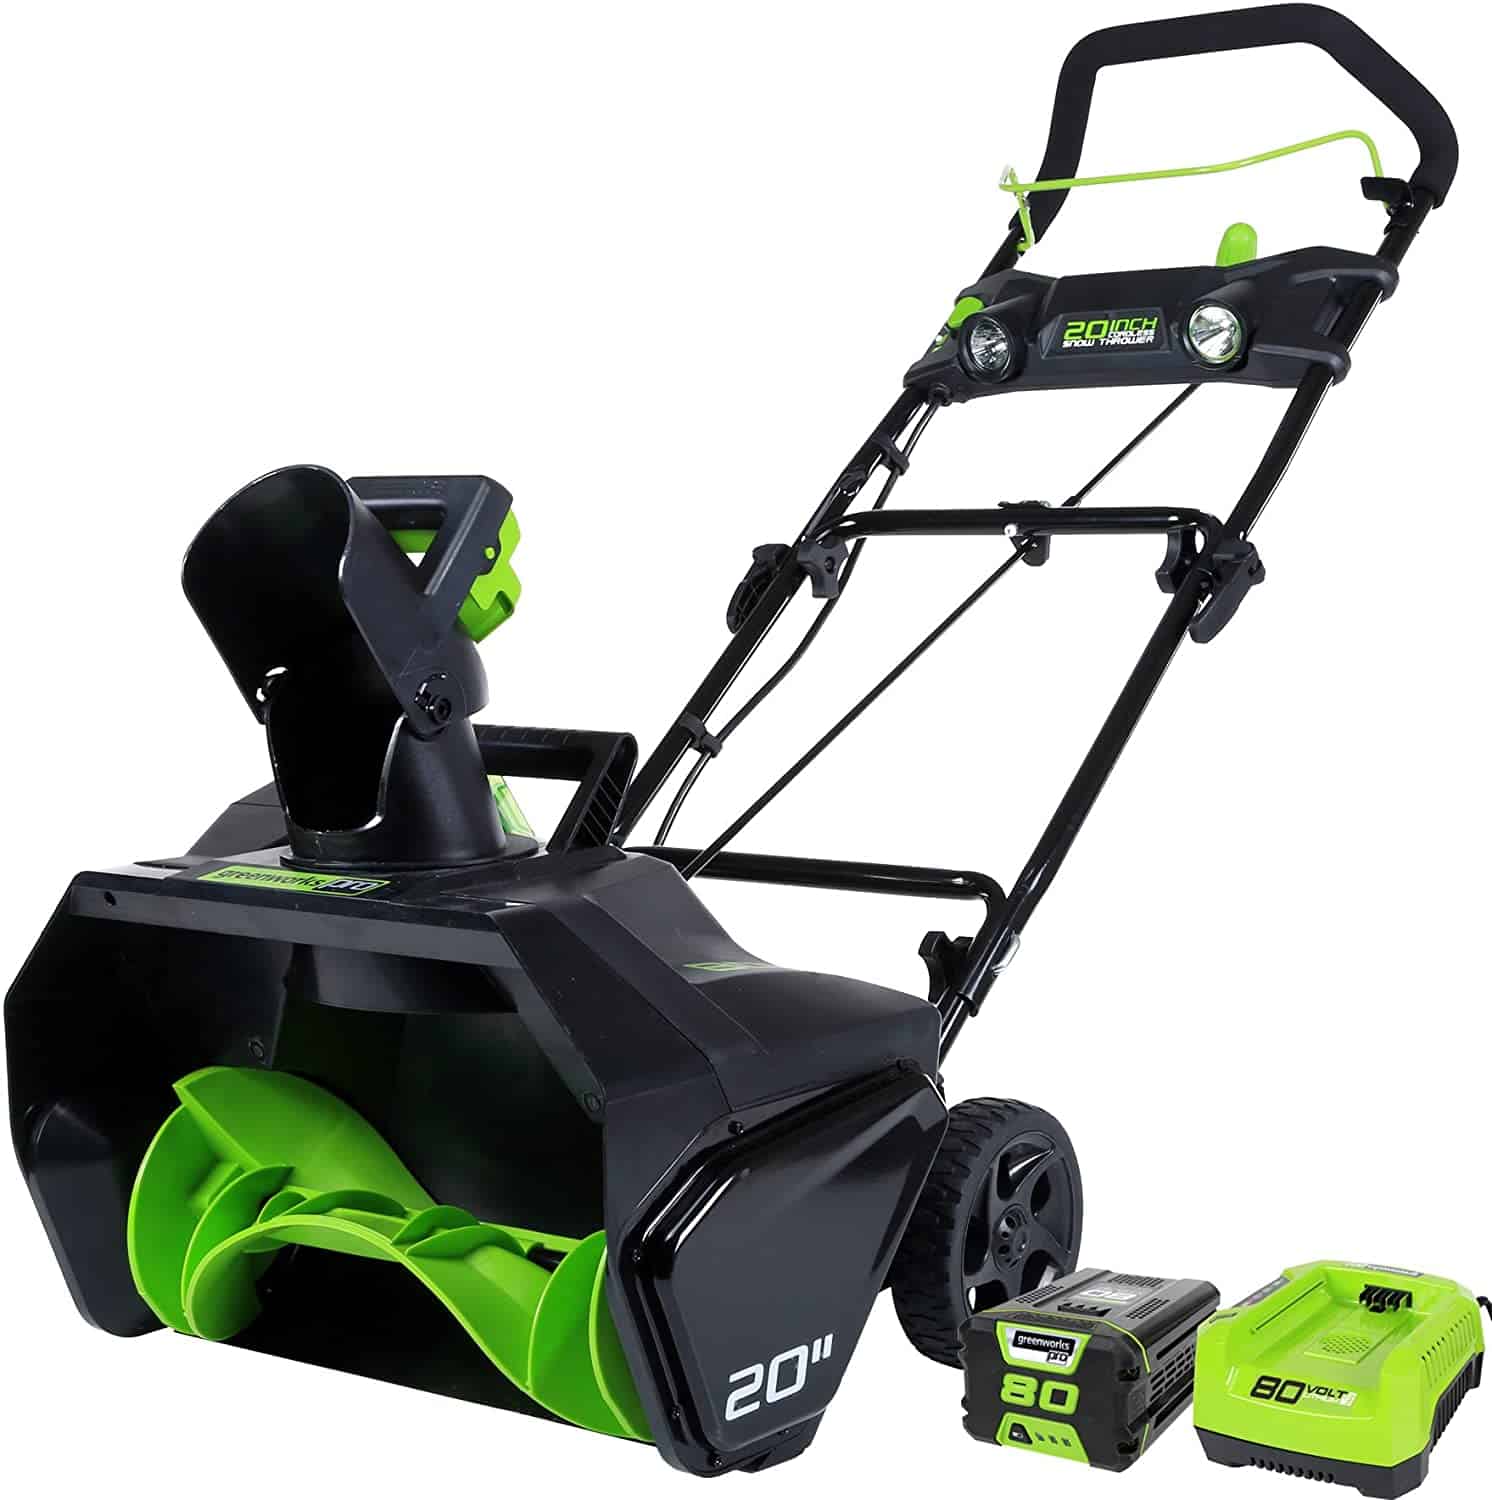 Greenworks Pro snow blower with battery packs